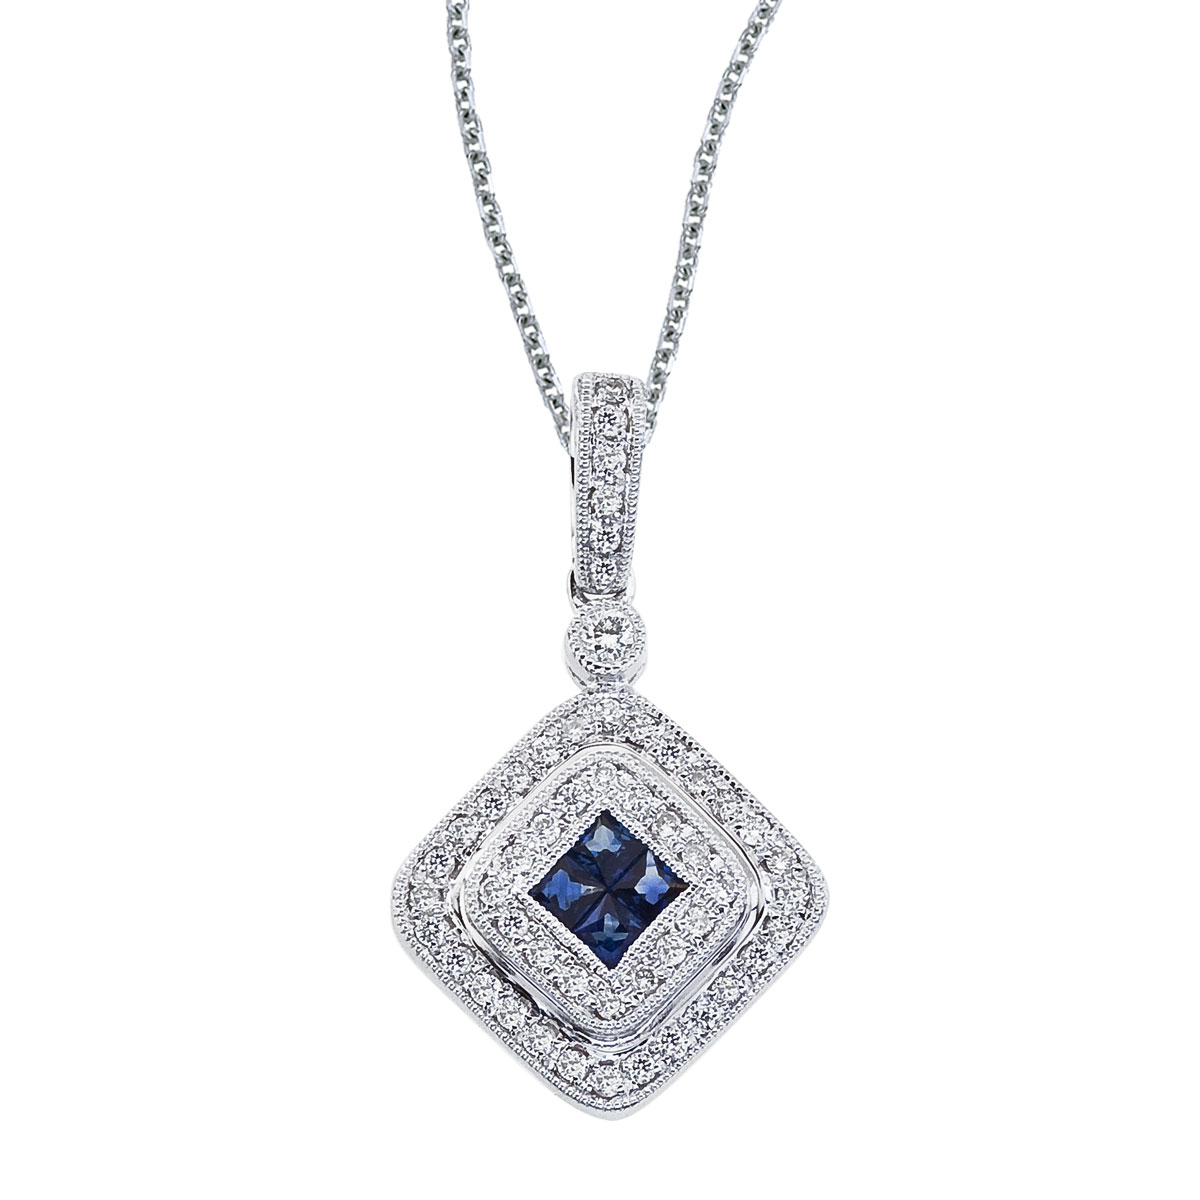 This fashionable pendant features four 1.6 mm sapphires and .17 total carats of sparkling diamonds.